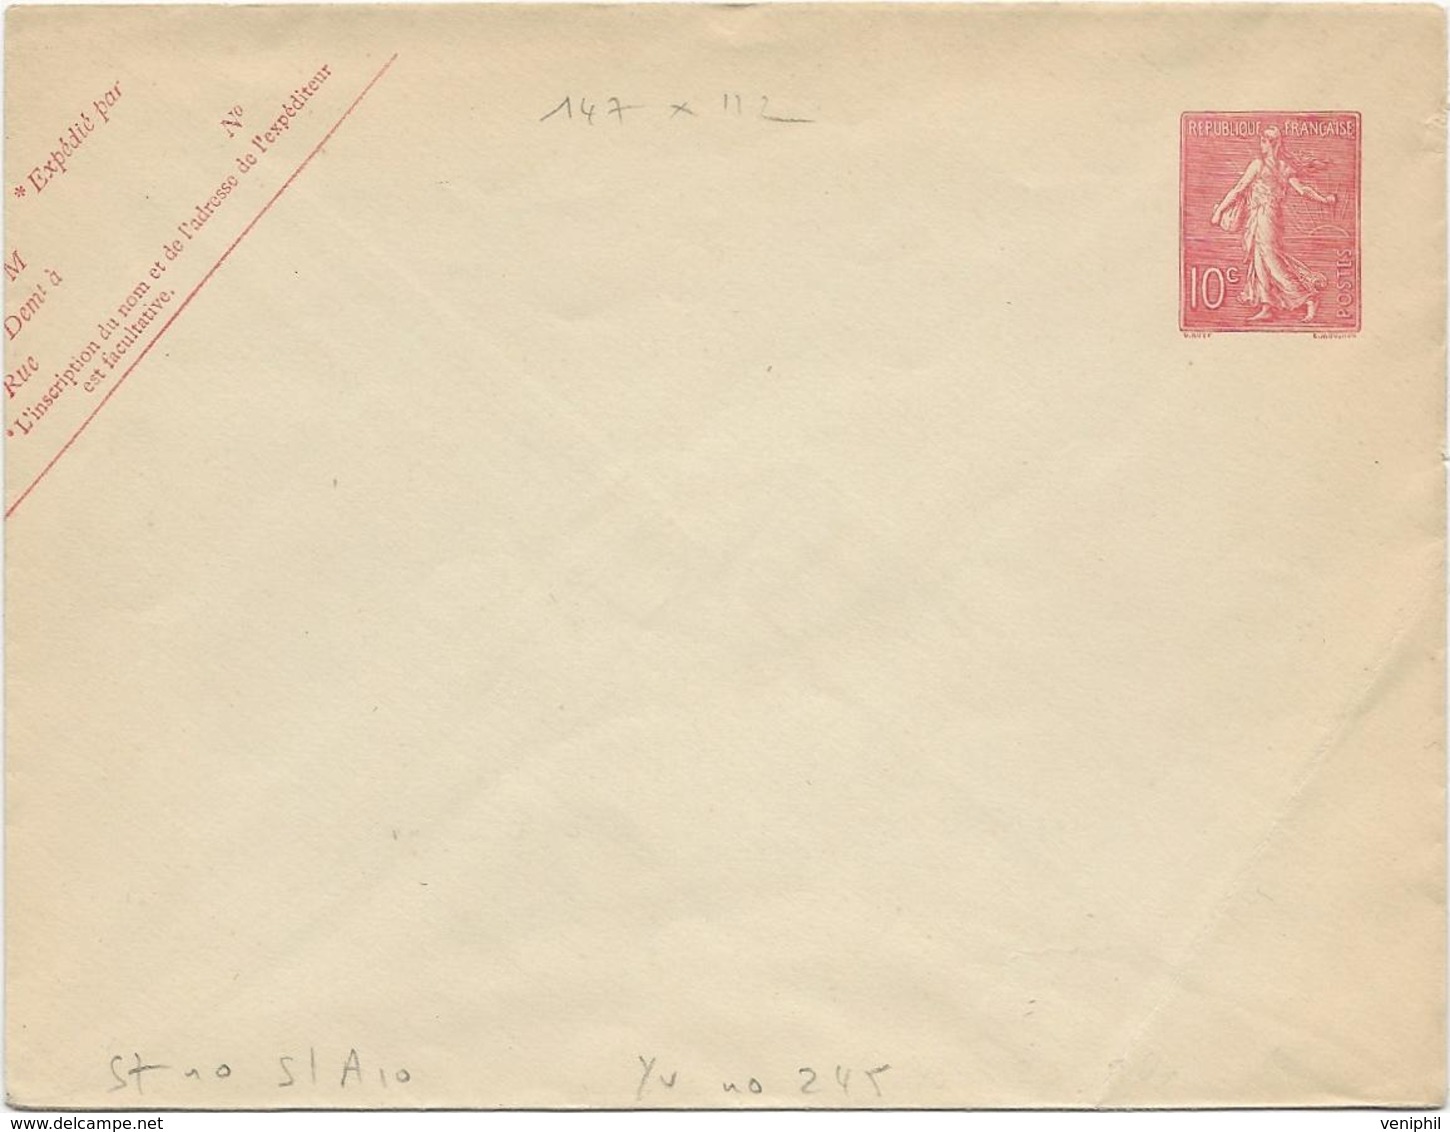 LETTRE ENTIER POSTAL N° 129 SEMEUSE LIGNEE- 1903 - Standard Covers & Stamped On Demand (before 1995)